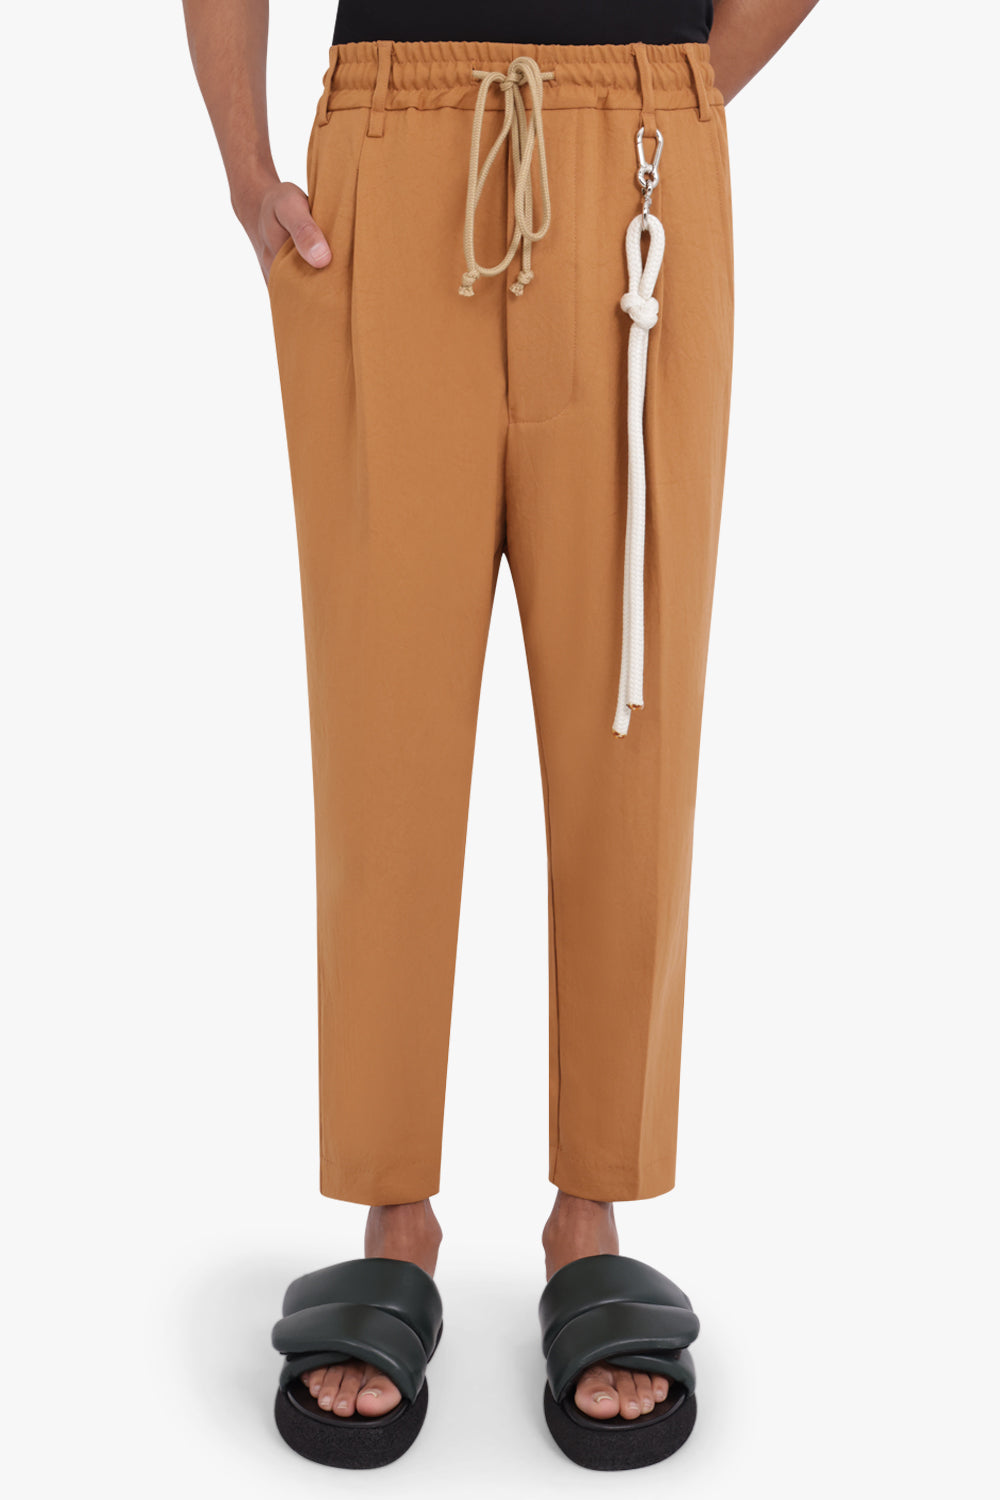 SONG FOR THE MUTE RTW LOUNGE PANT | CAMEL